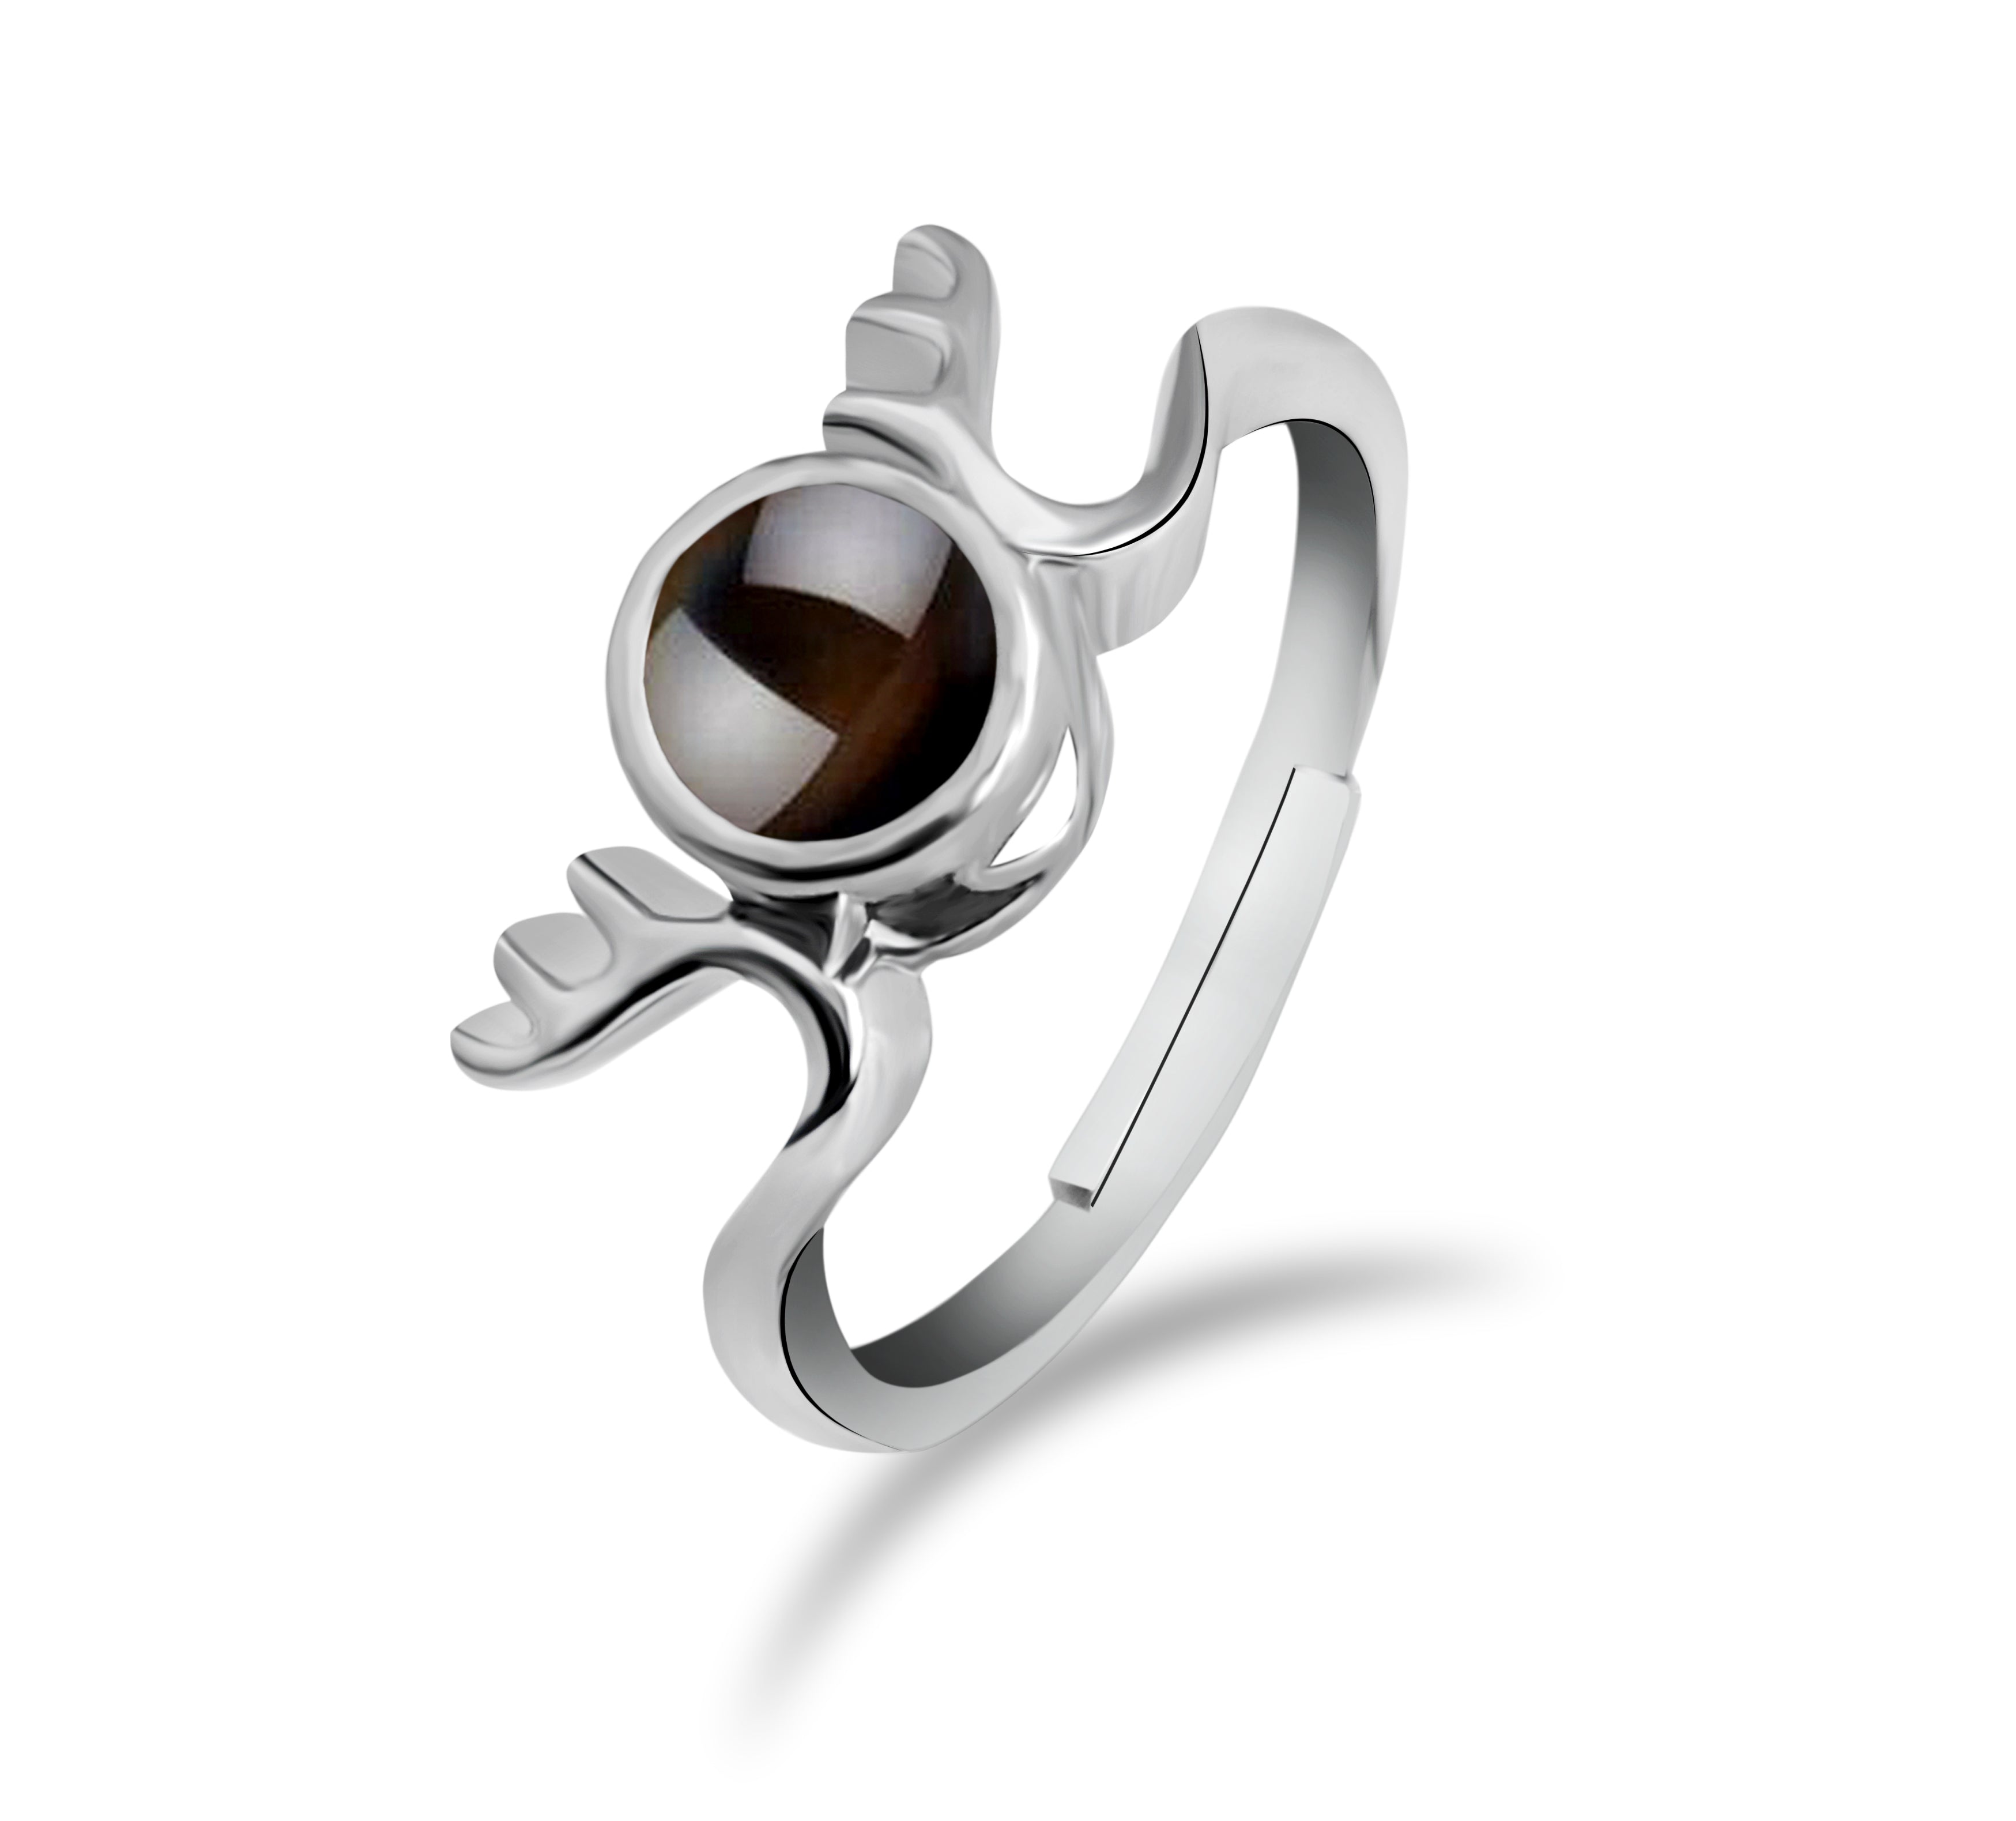 Urbana Silver Plated Single Adjustable Ring Reflecting I love you In 100 Languages